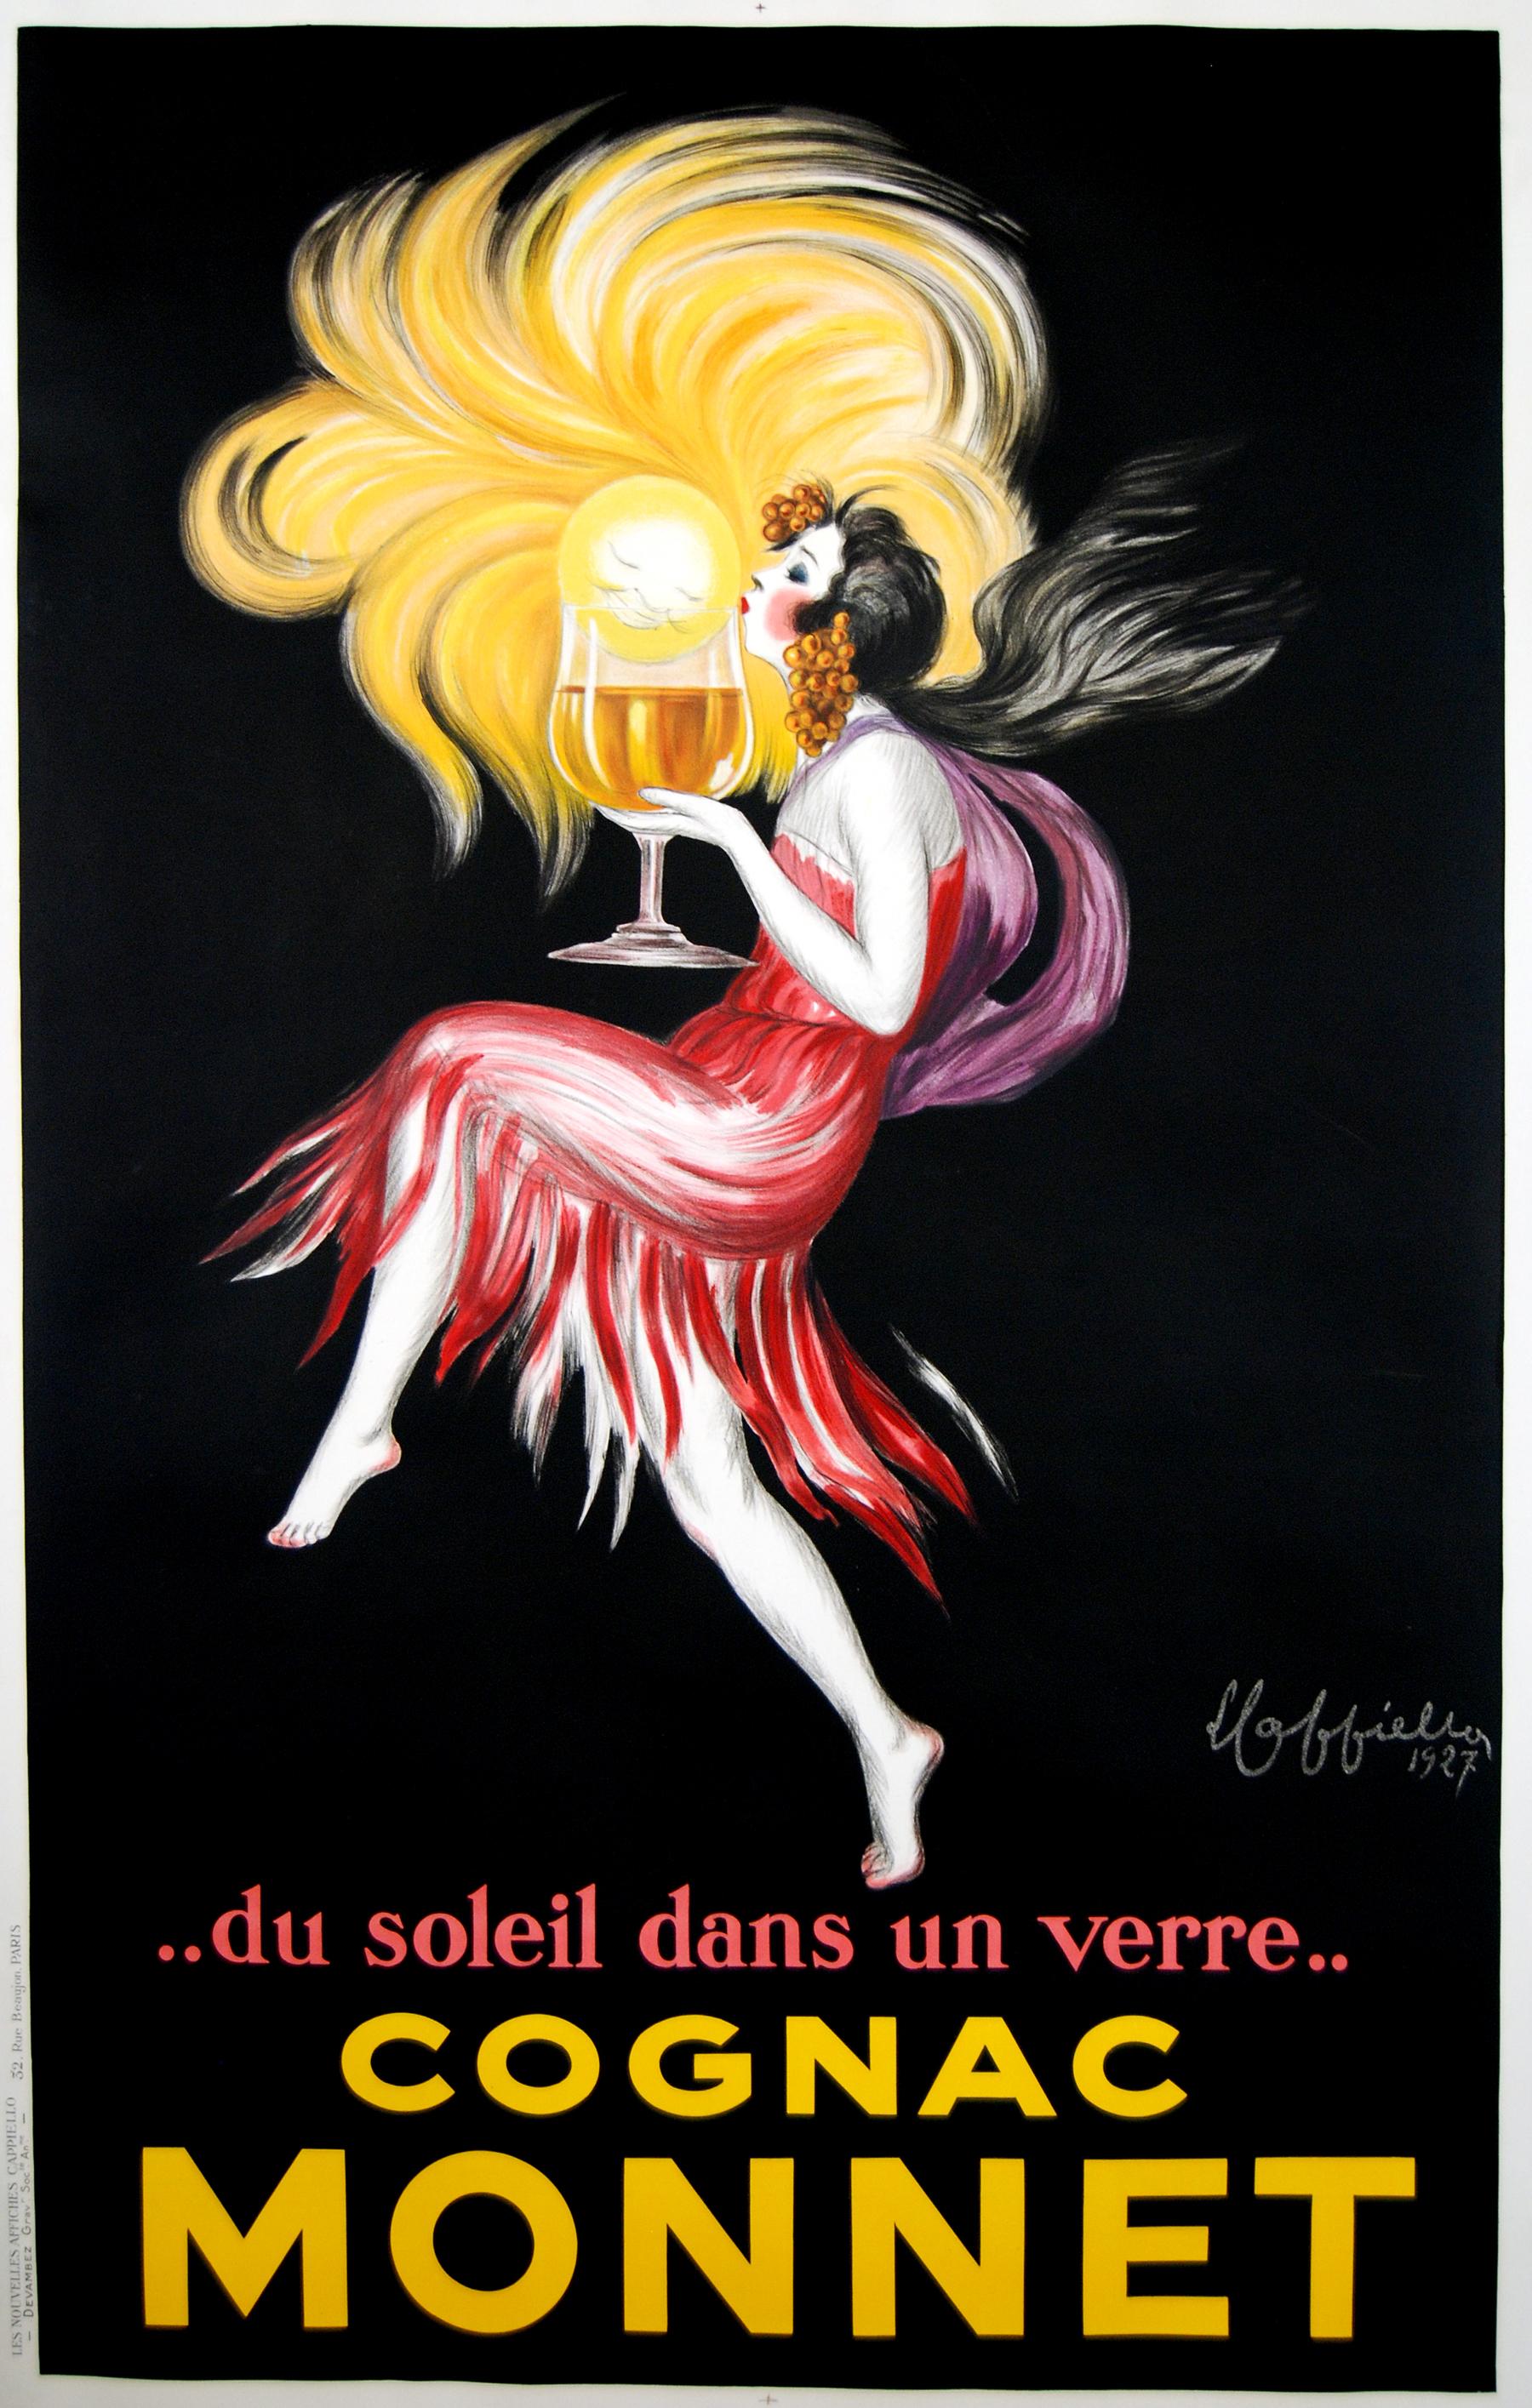 What does Cognac do? It warms you! Featuring a sun in the glass, this poster by Cappiello visually represents the warmth of the drink as sunshine bursts out of the glass. The text below "du soleil dans un verre", which reads "a sun in the glass,"